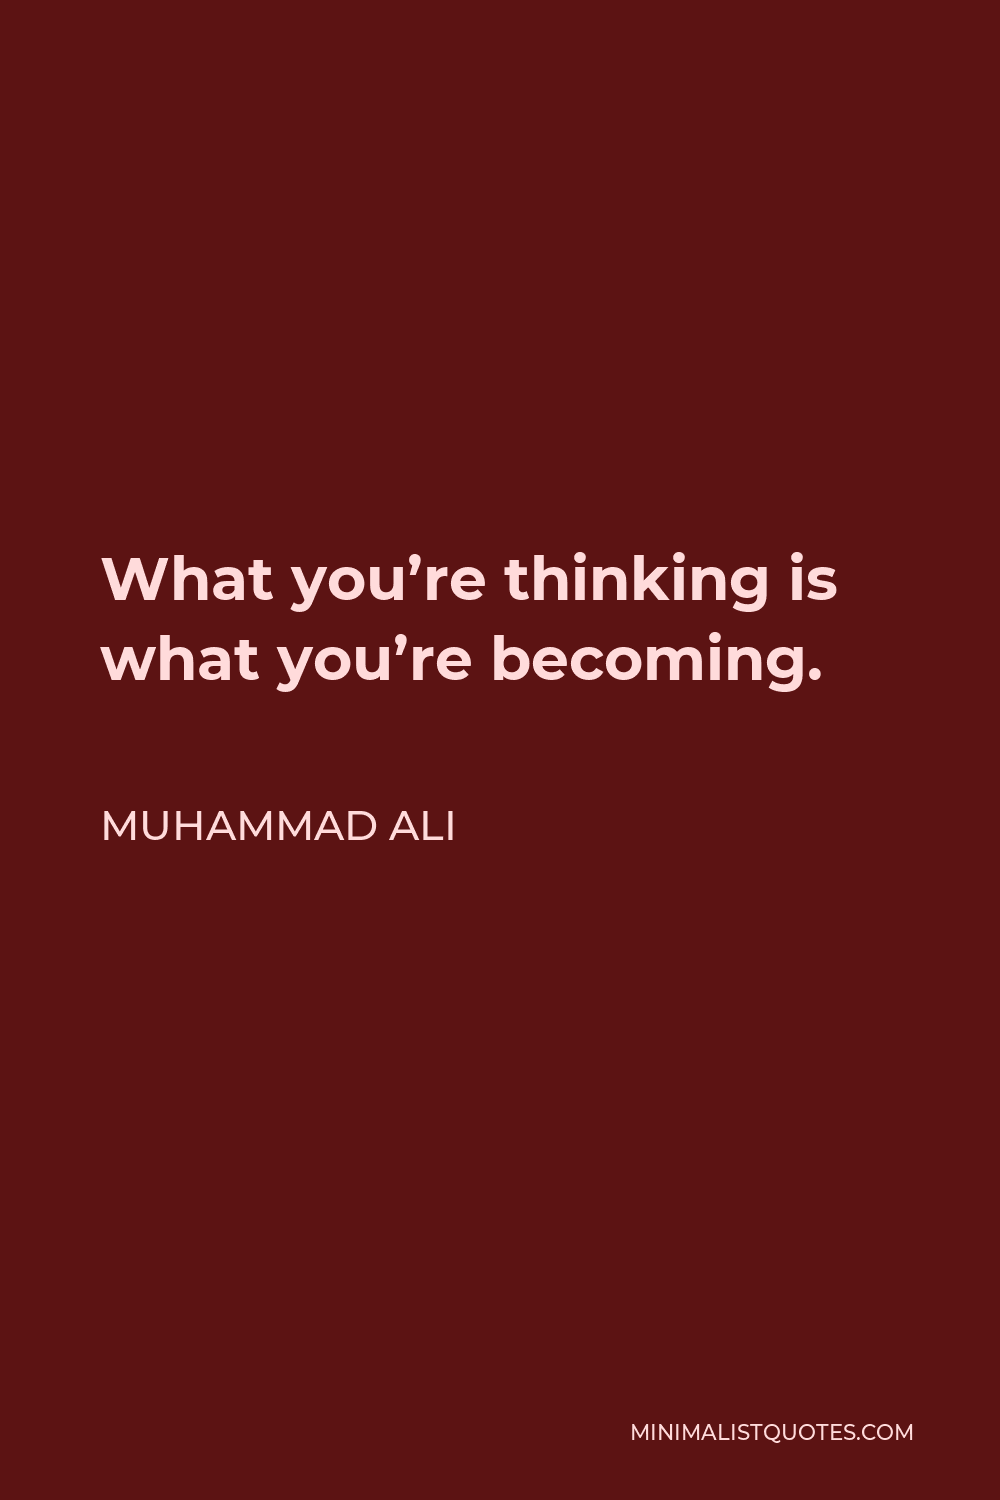 Muhammad Ali Quote - What you’re thinking is what you’re becoming.